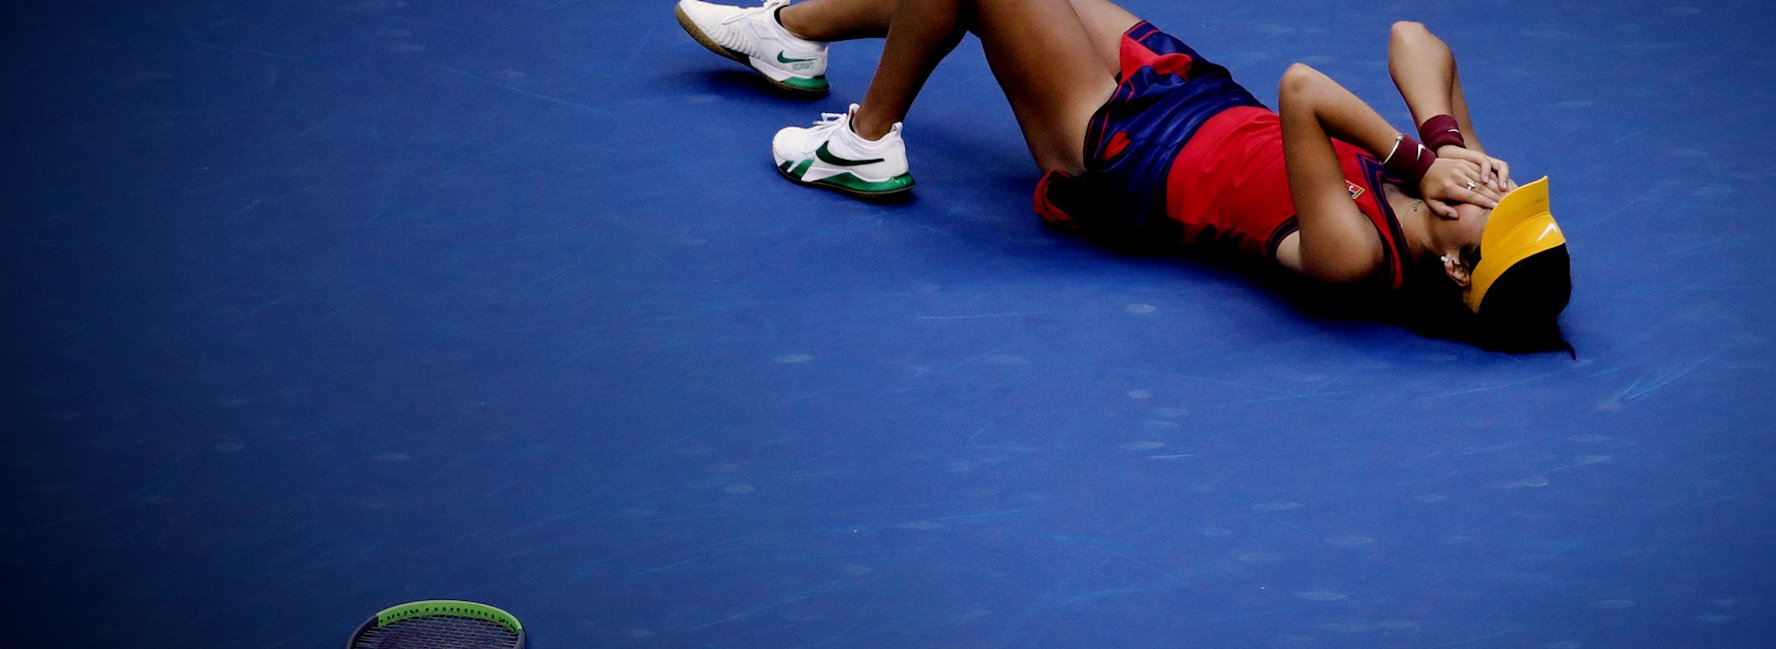 Tennis player lying on the floor after a game